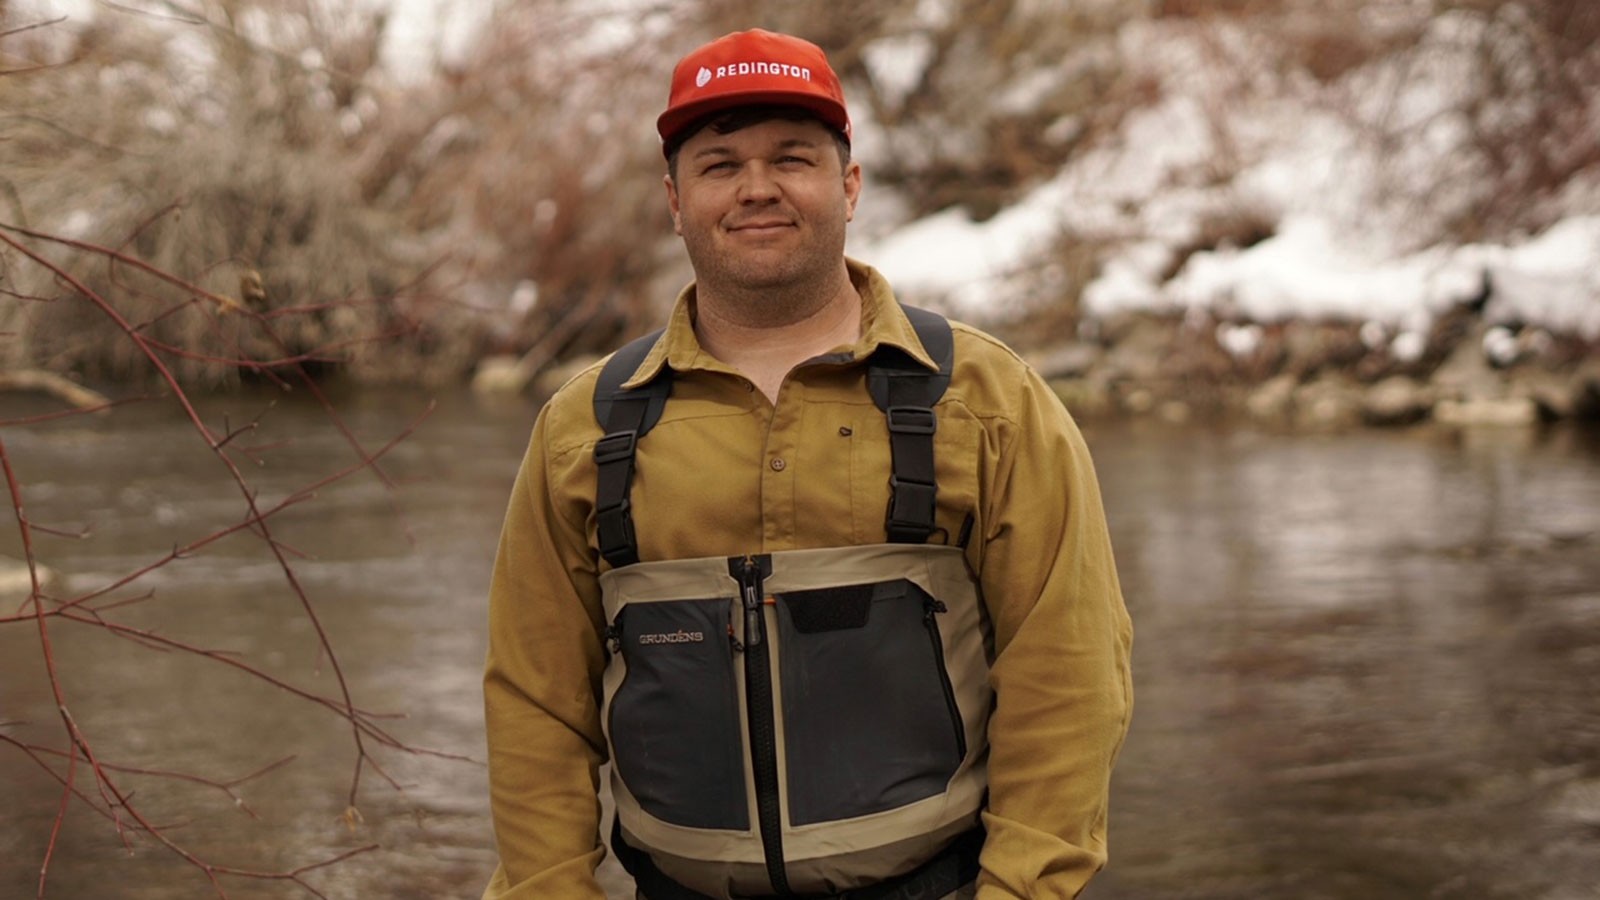 Simms Watershed Wader now available – Simms Gives Back to the Yellowstone